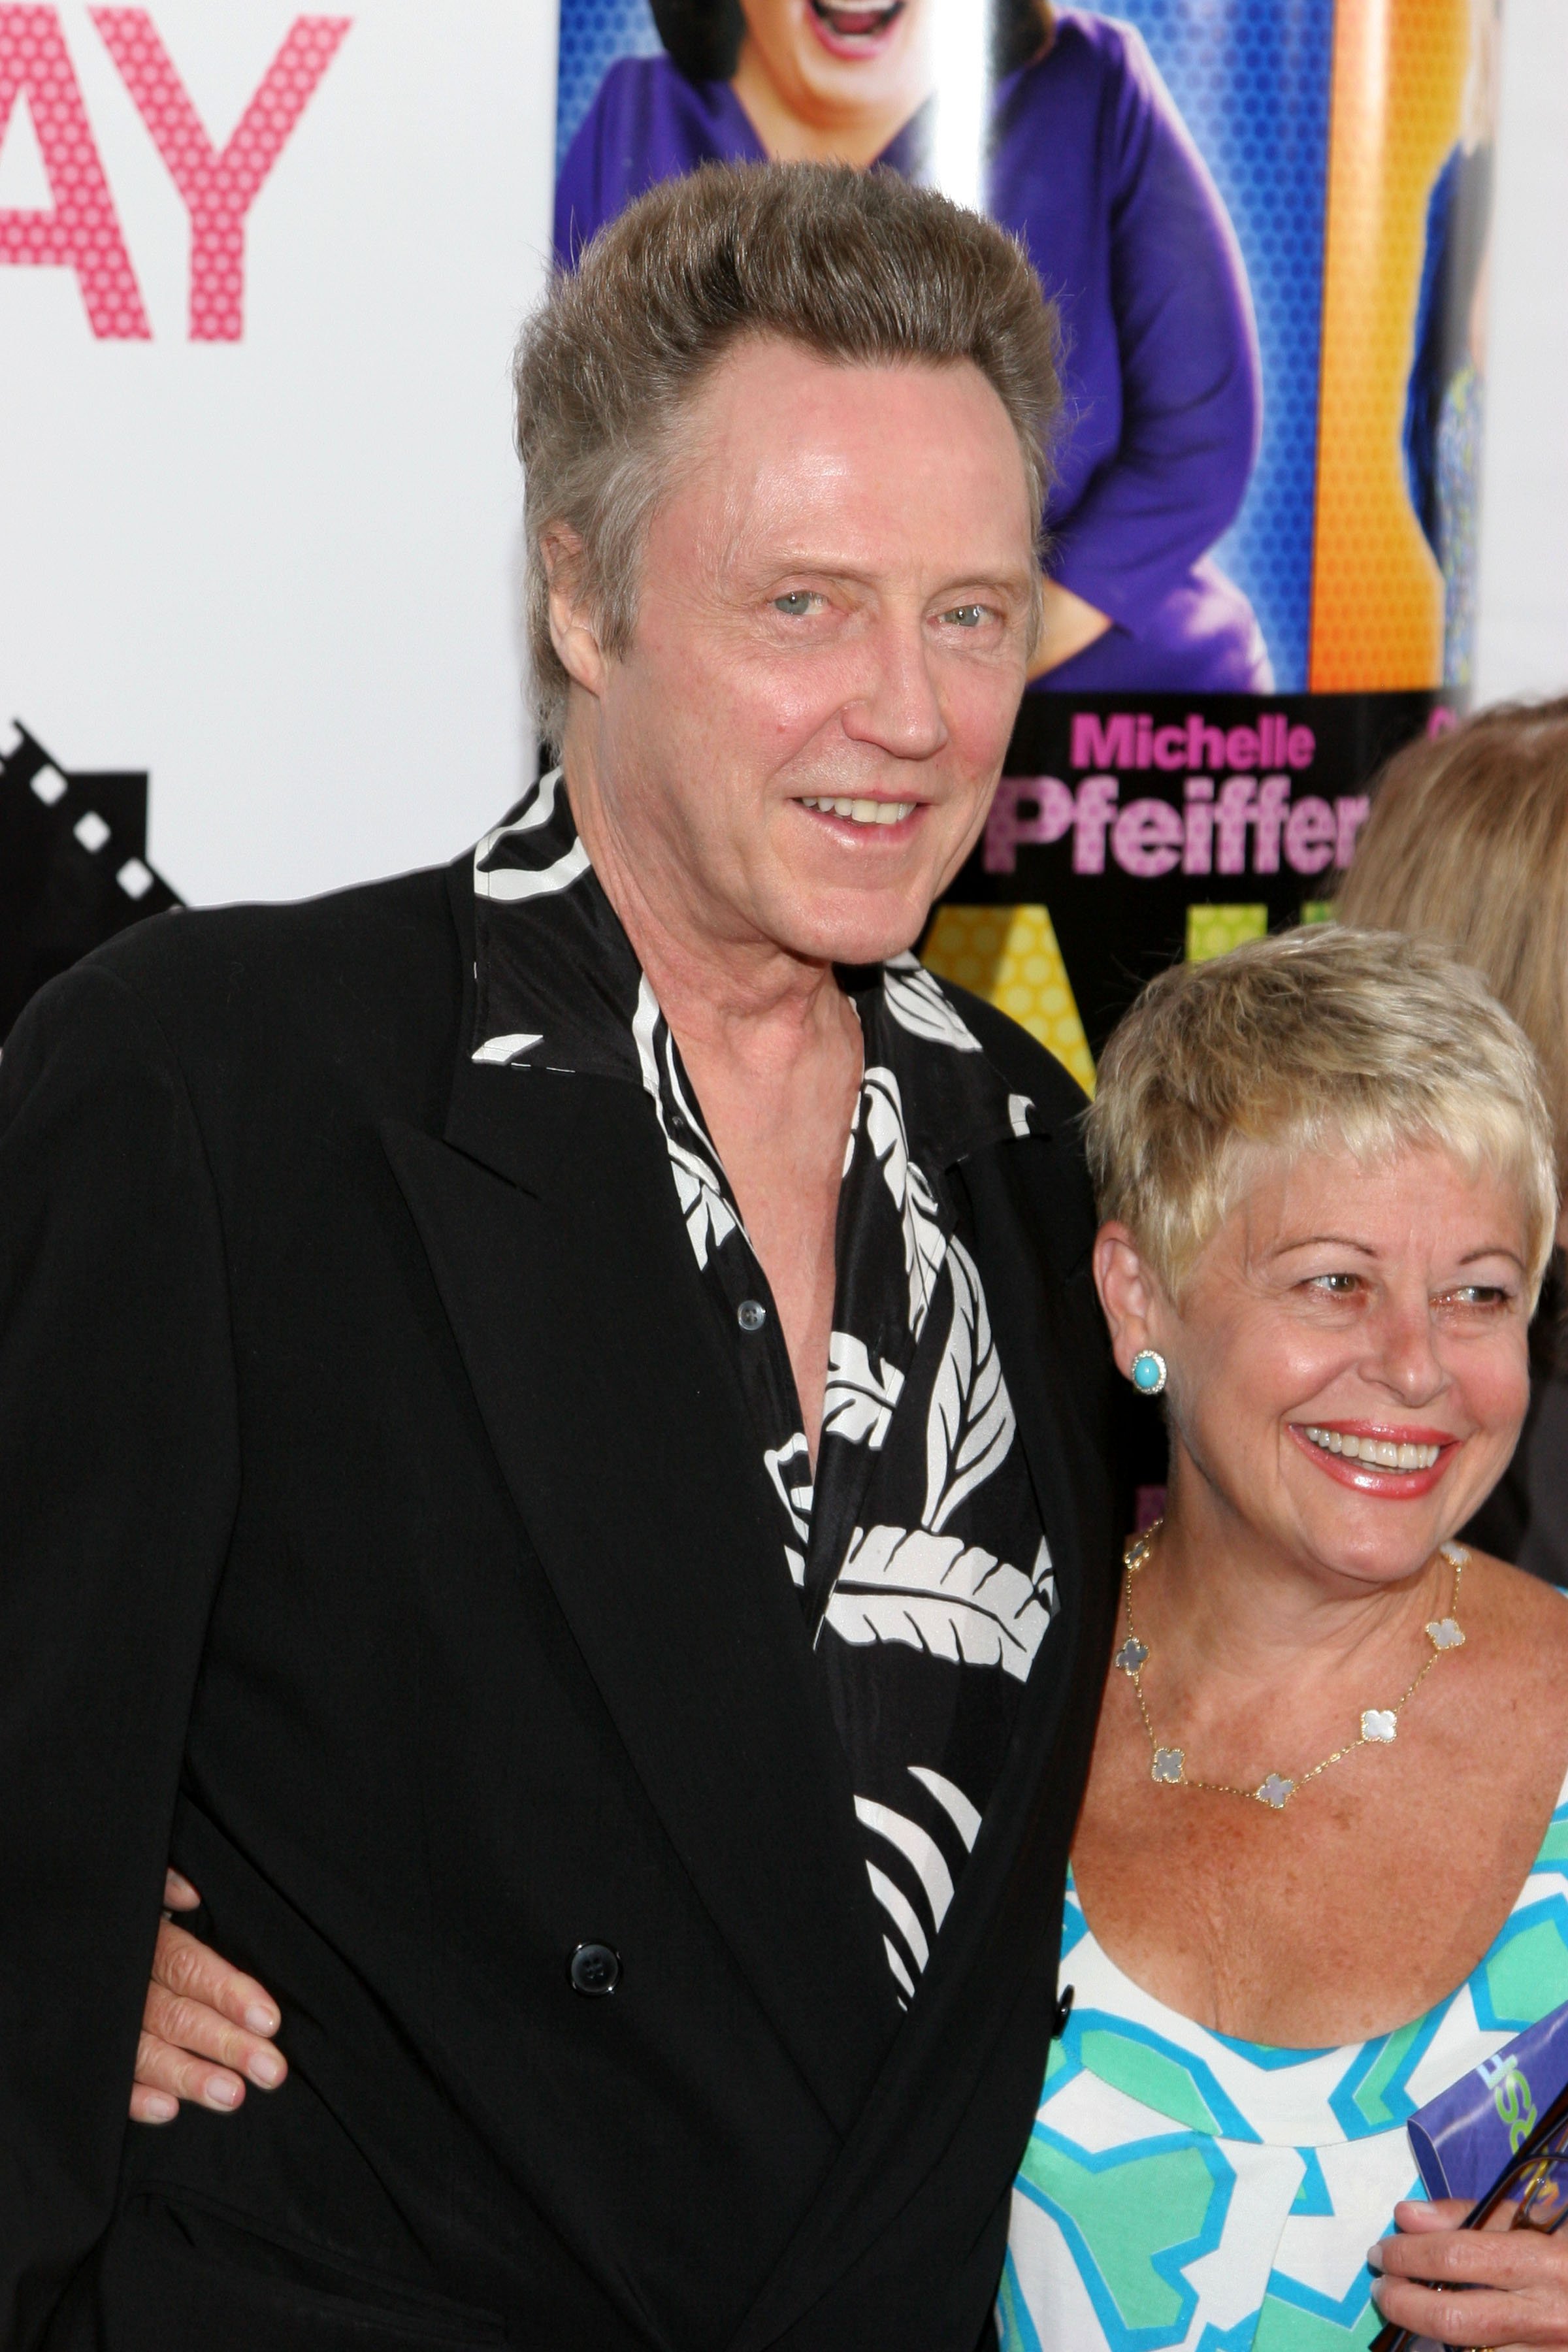 Christopher Walken and Georgianne at the New York premiere of "Hairspray" on July 16, 2007 | Source: Getty Images